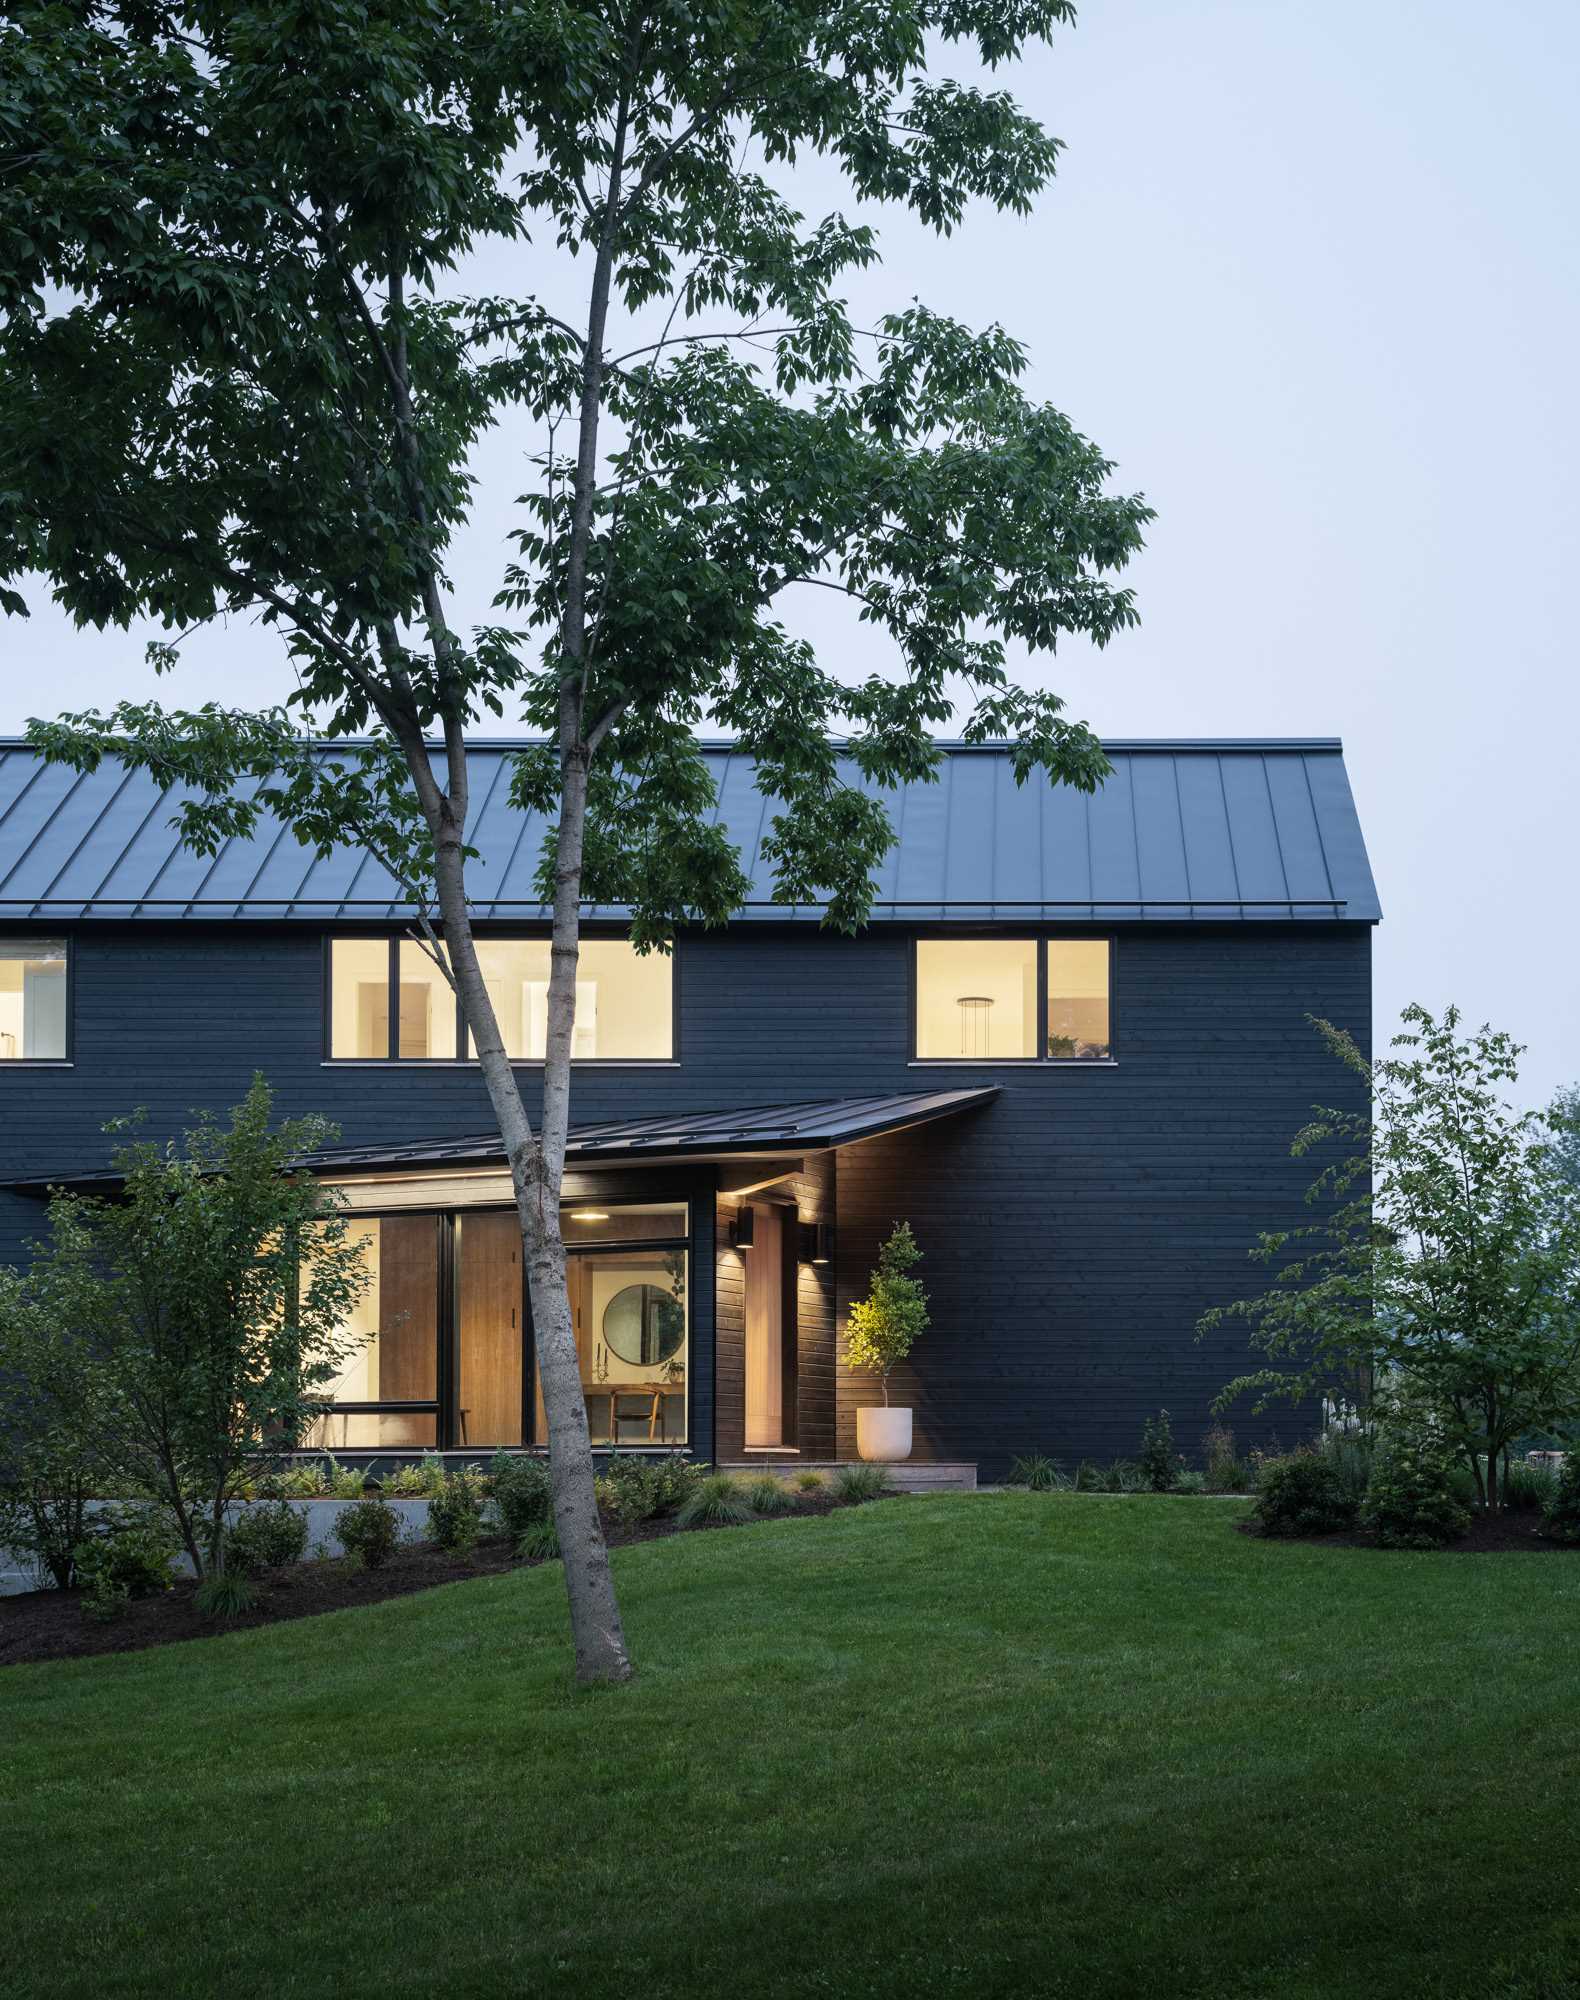 A modern house with black stained wood siding.